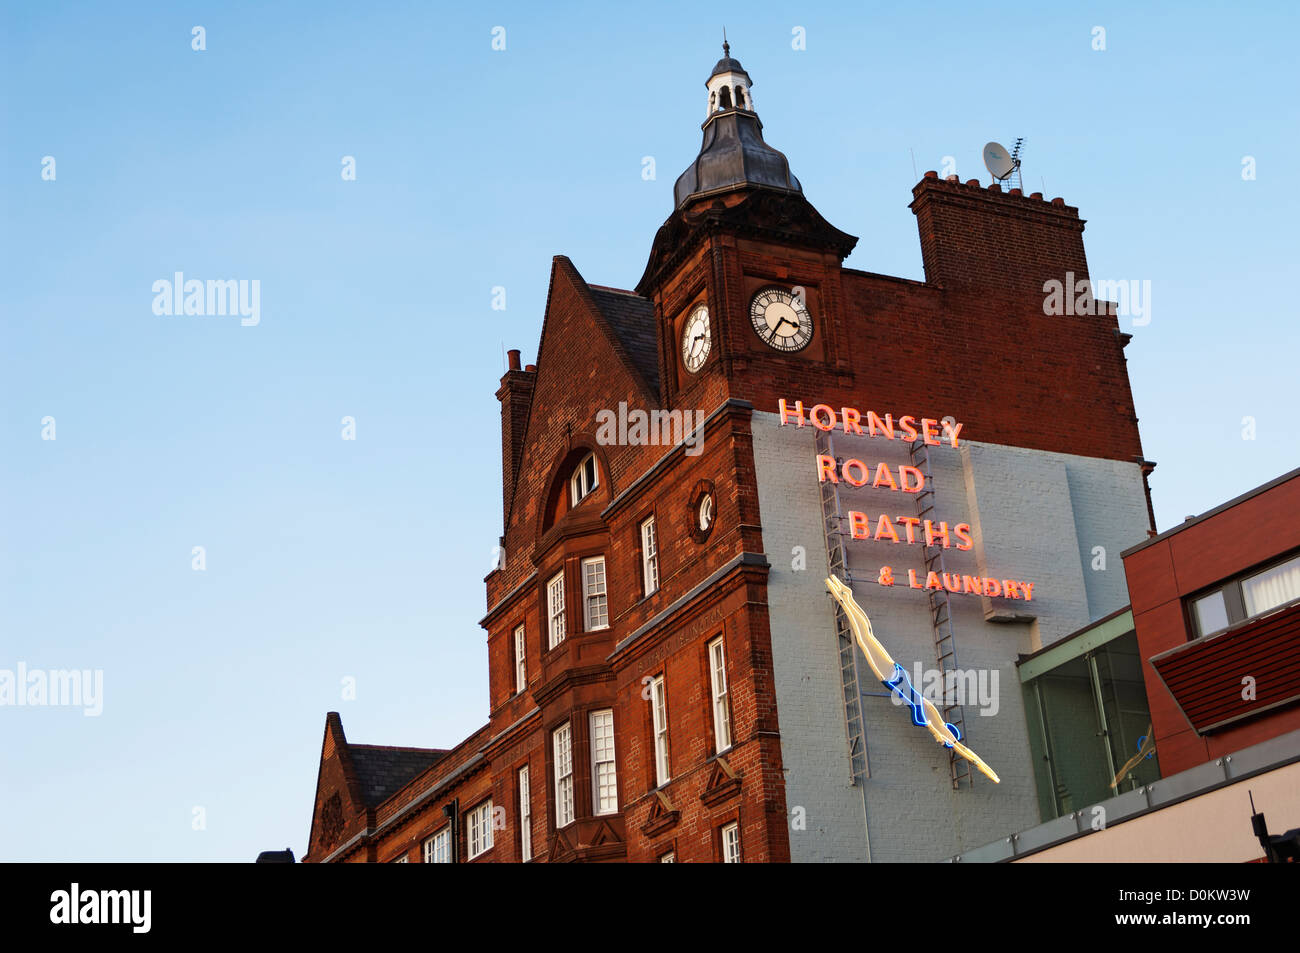 Looking up at a neon sign for the Hornsey Road Baths and Laundry. Stock Photo